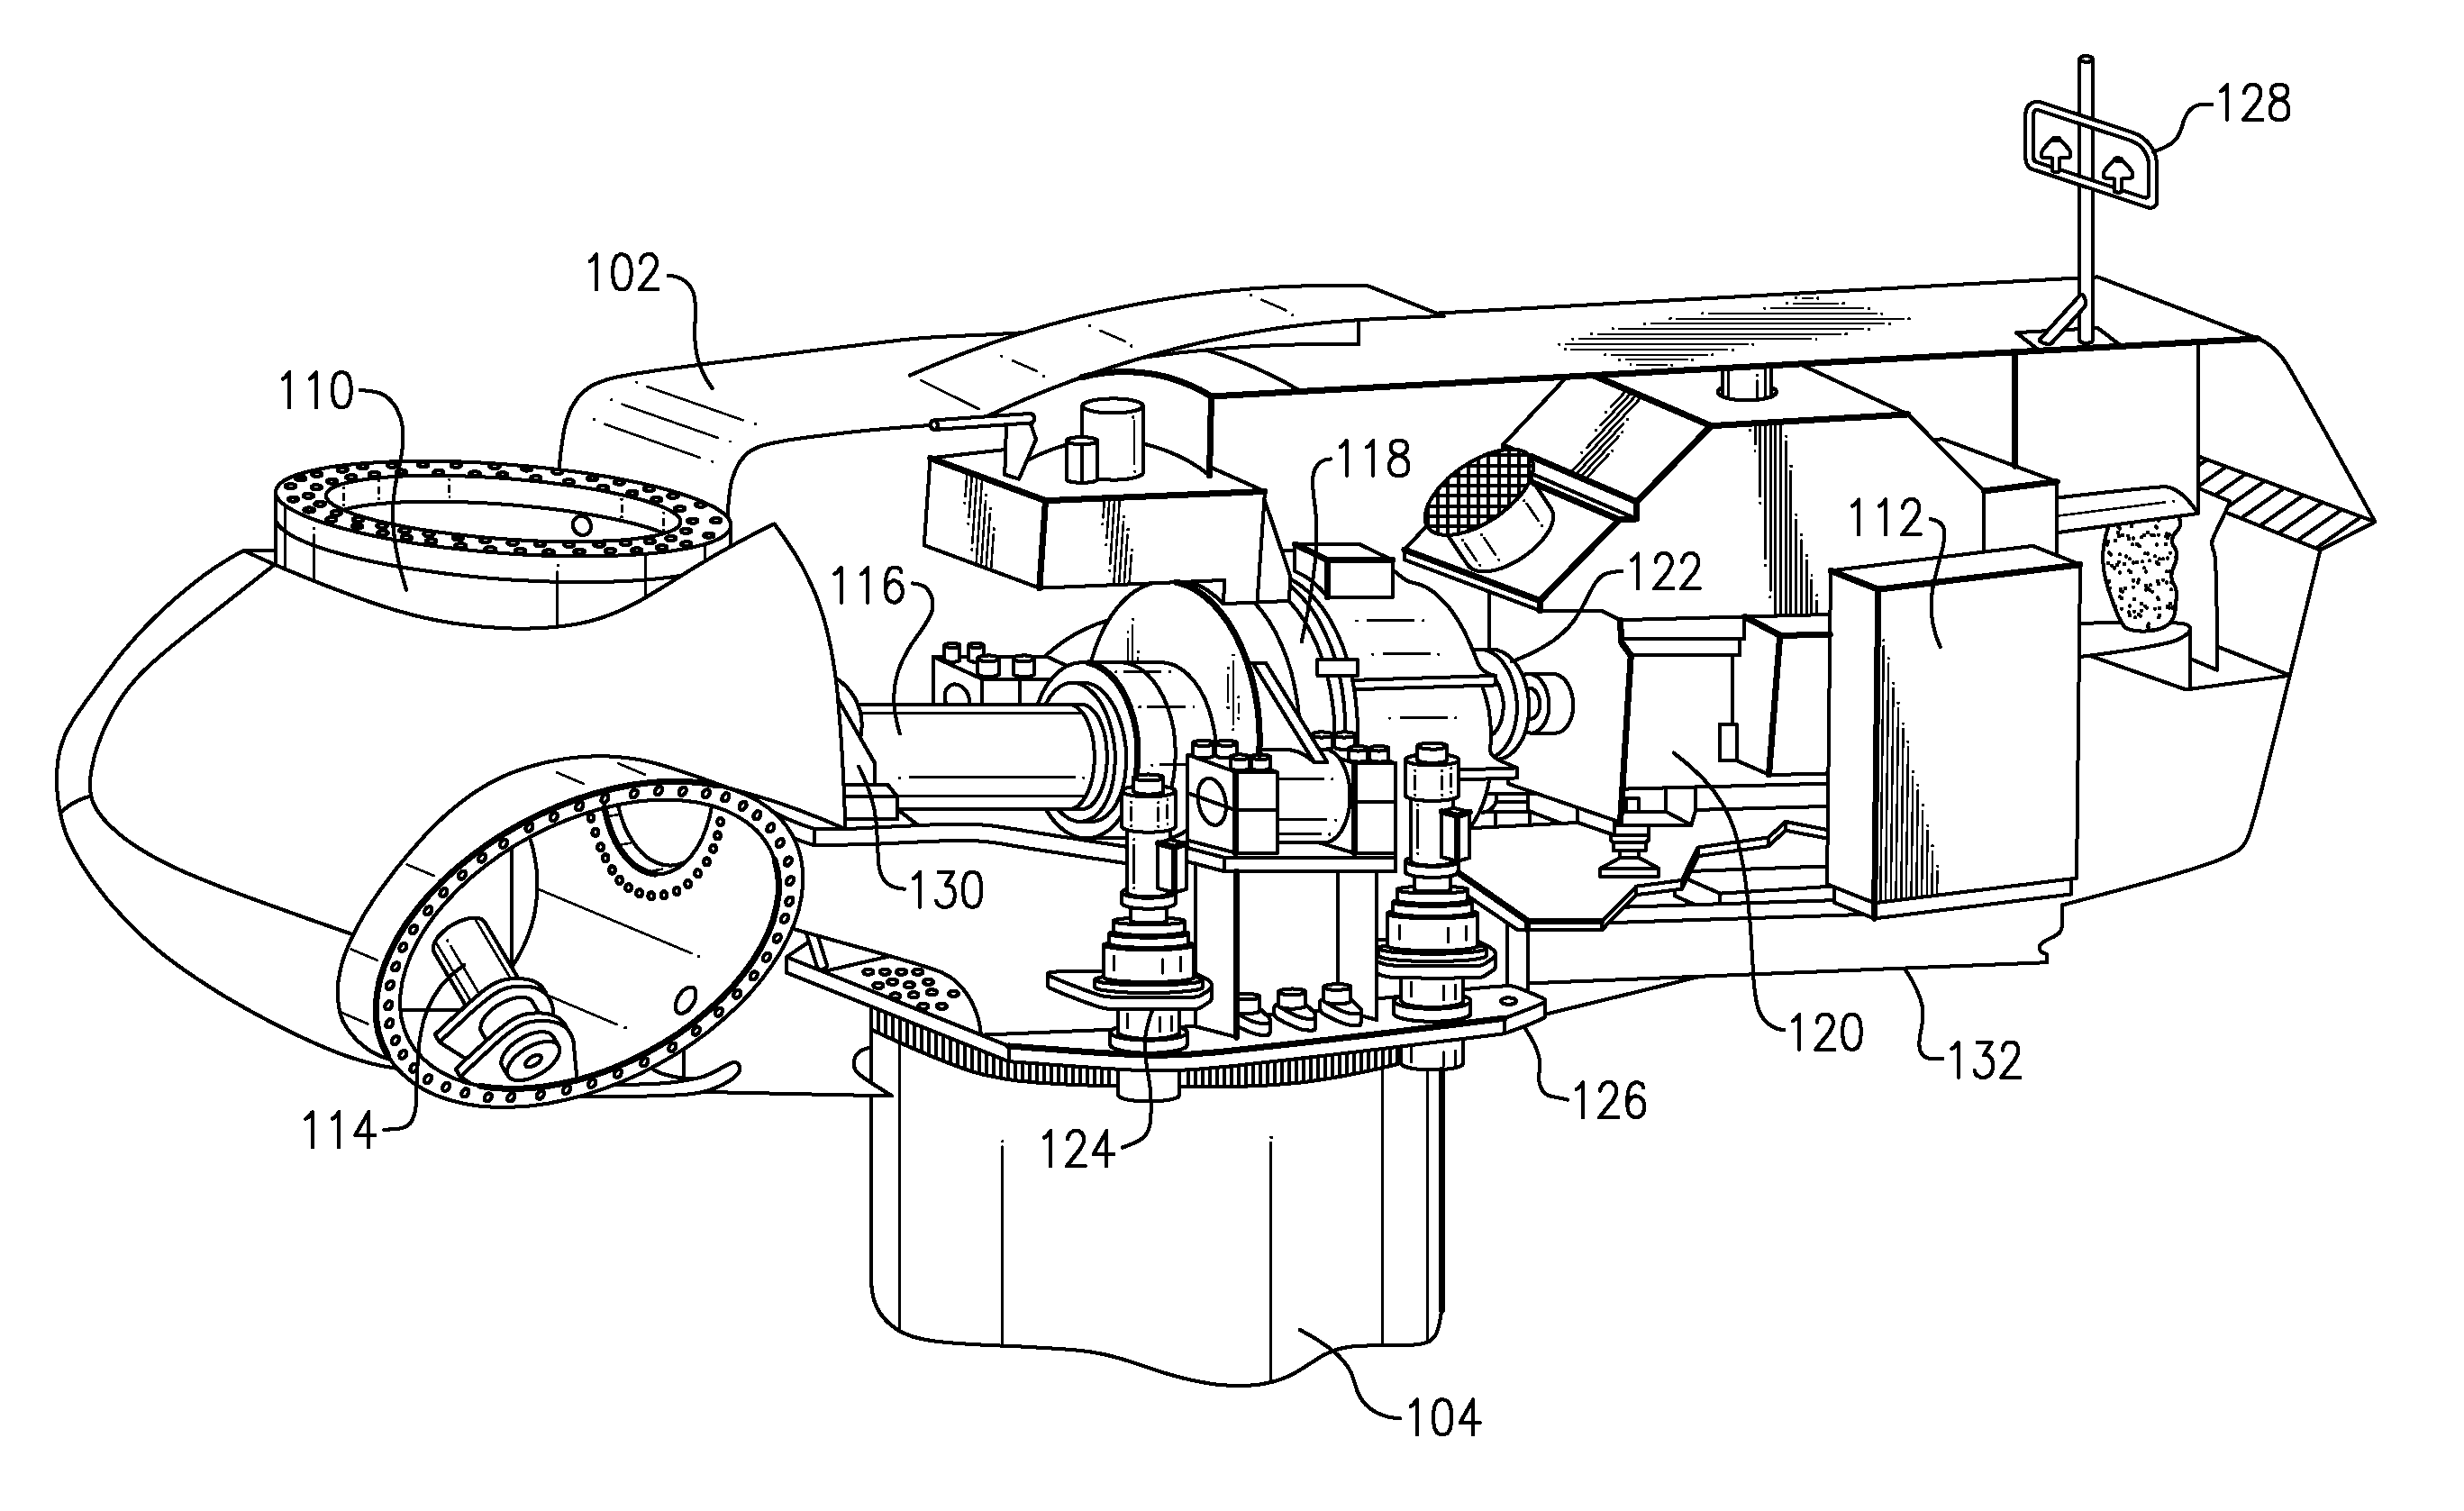 Apparatus and method for reducing asymmetric rotor loads in wind turbines during shutdown